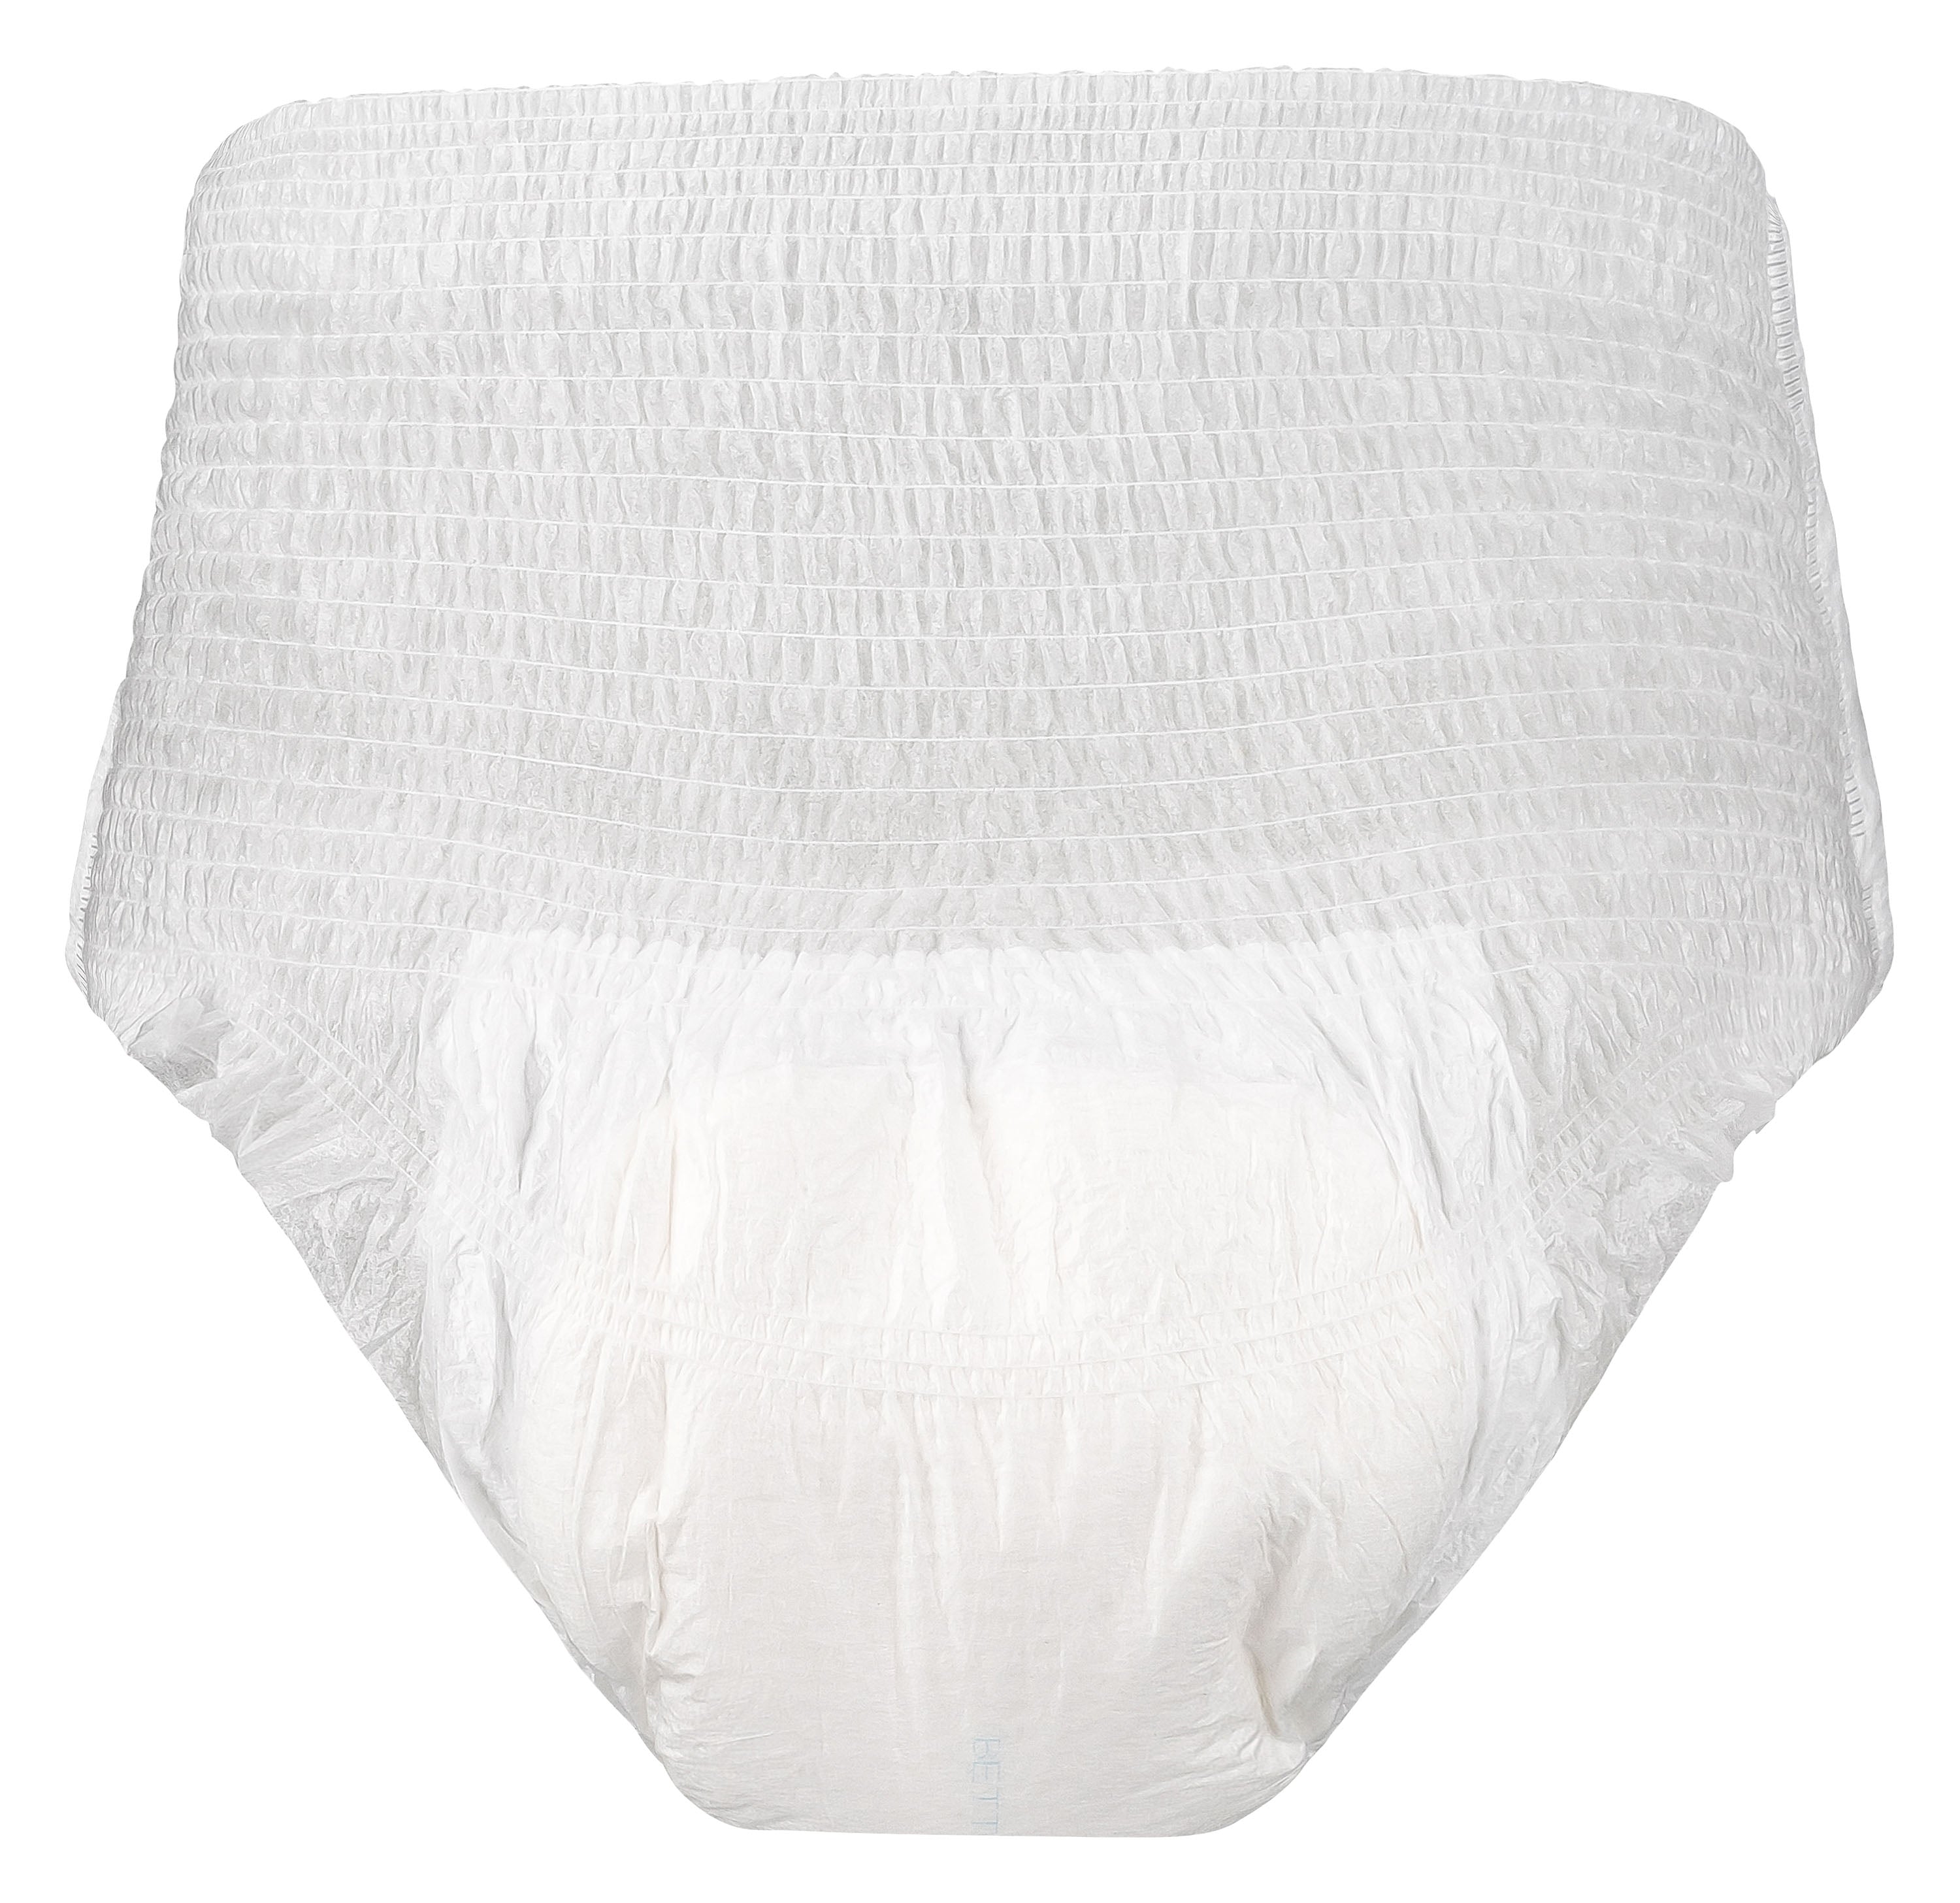 BetterDry Pull-On M8 adult diaper front